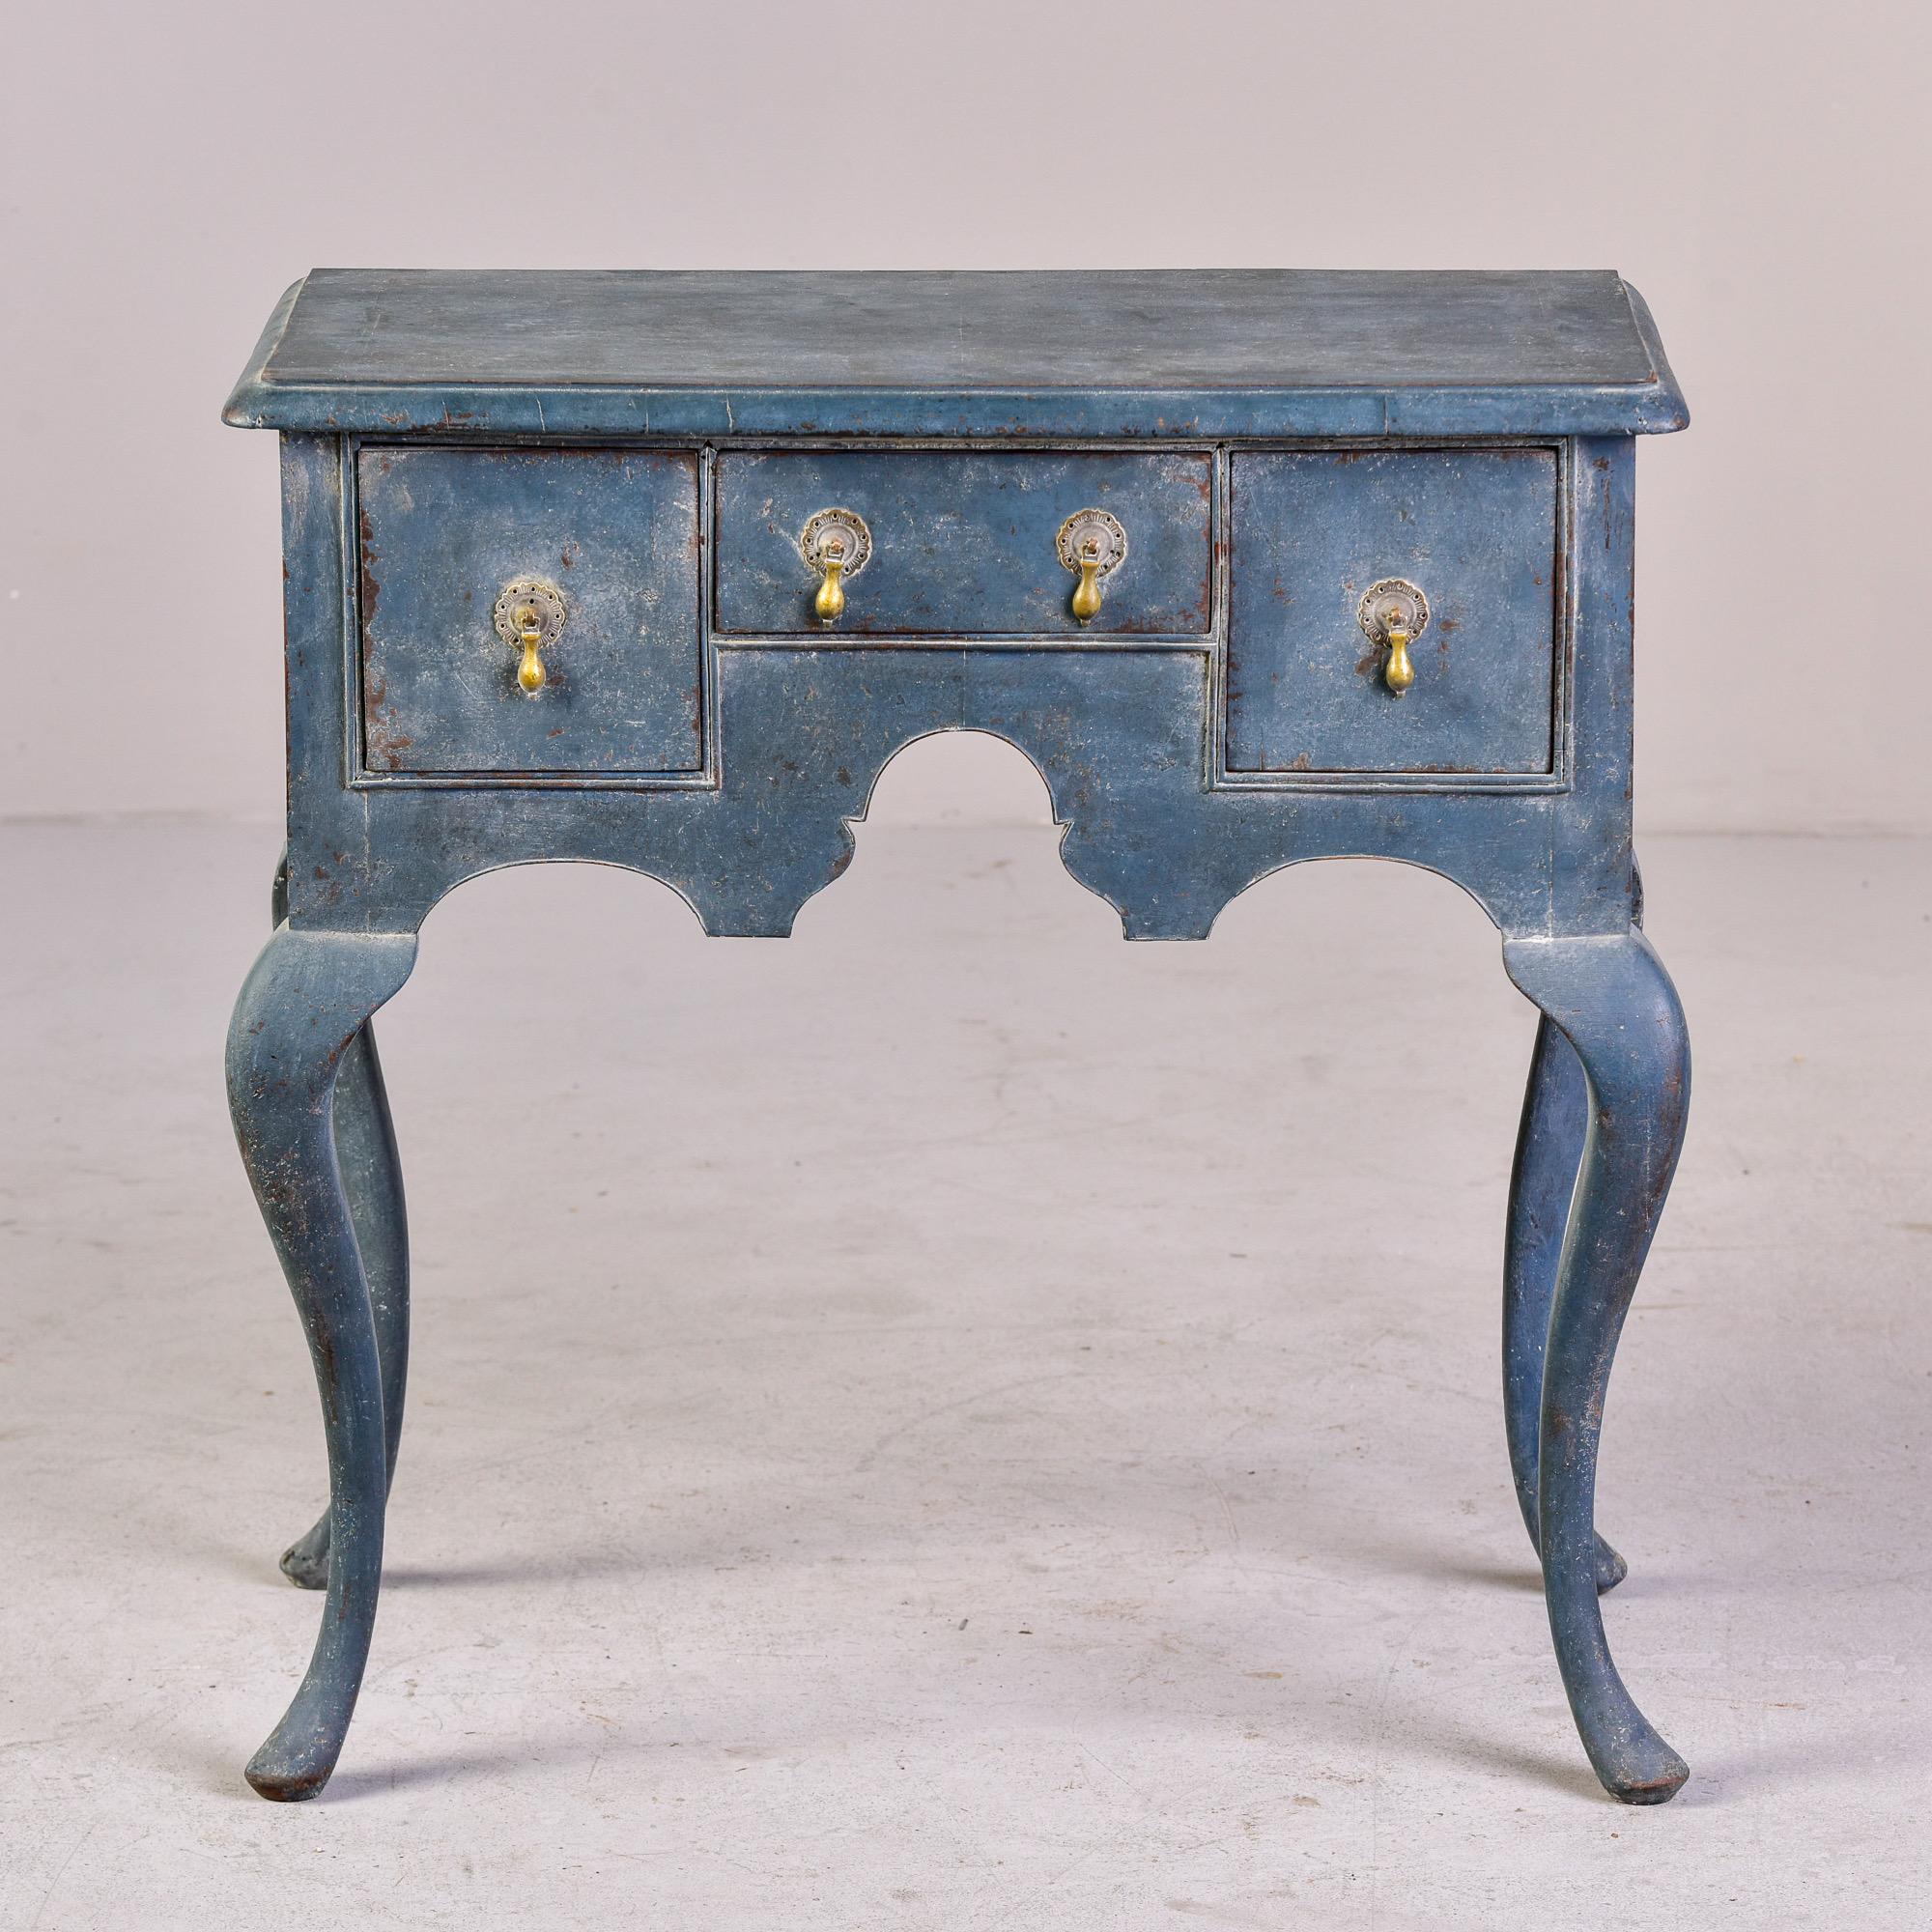 Circa 1760 English lamp table or lowboy features three functional drawers with brass hardware, a carved apron, curvy legs, and a blue painted finish. Unknown maker. Very good antique condition.